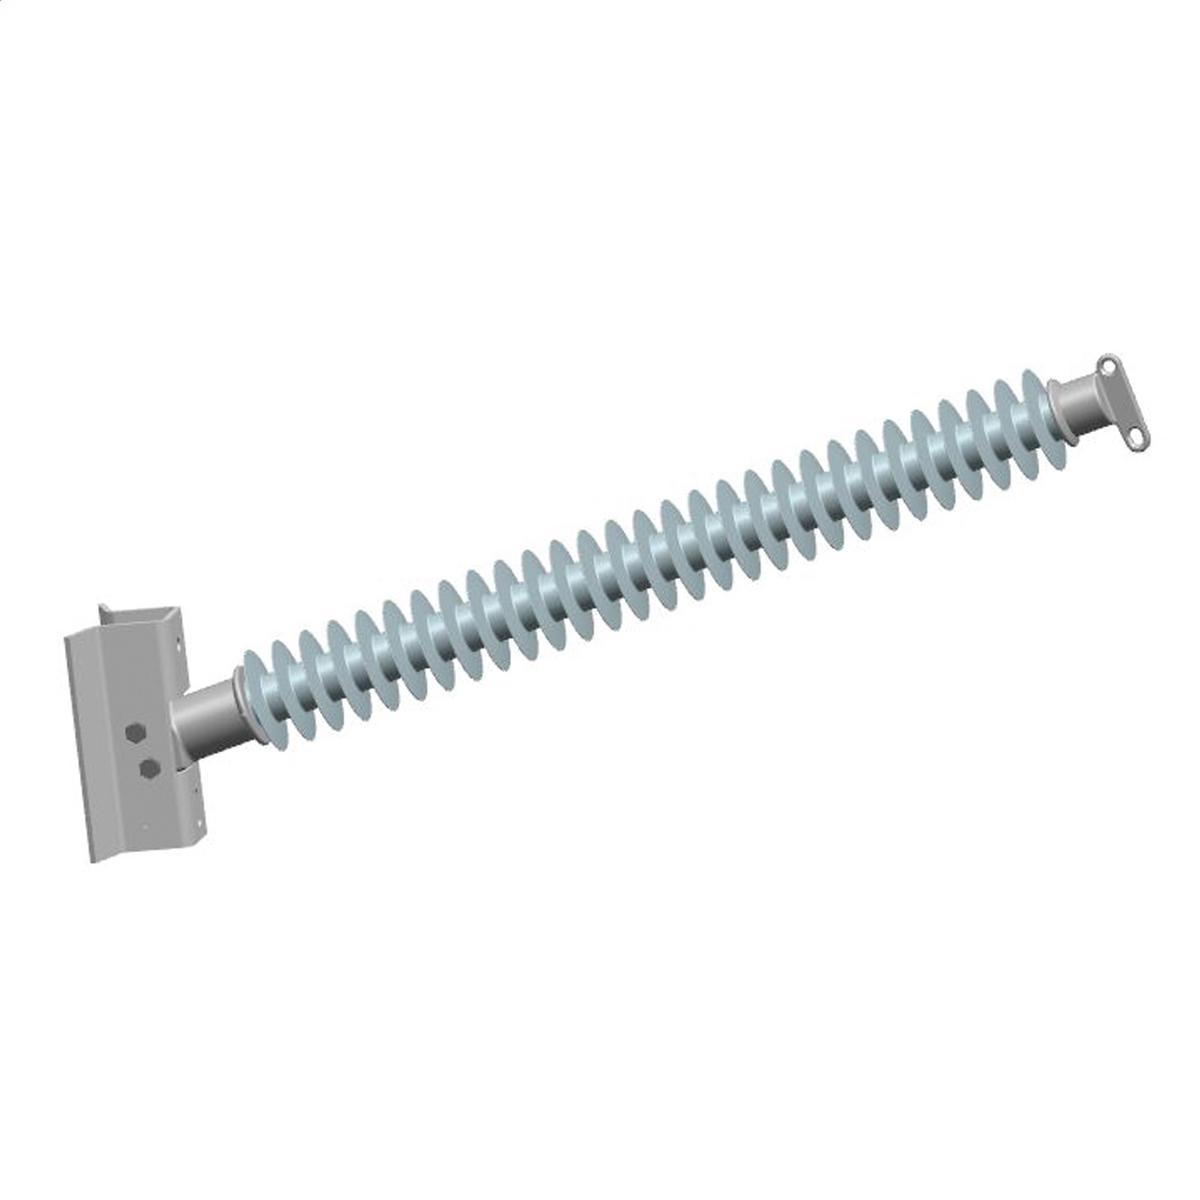 Hubbell P350090S0070 3.5" Line Post, 2 hole blade, Steel gain base 14" CL - 1" bolts  ; Made from hydrophobic silicone polymer ; 